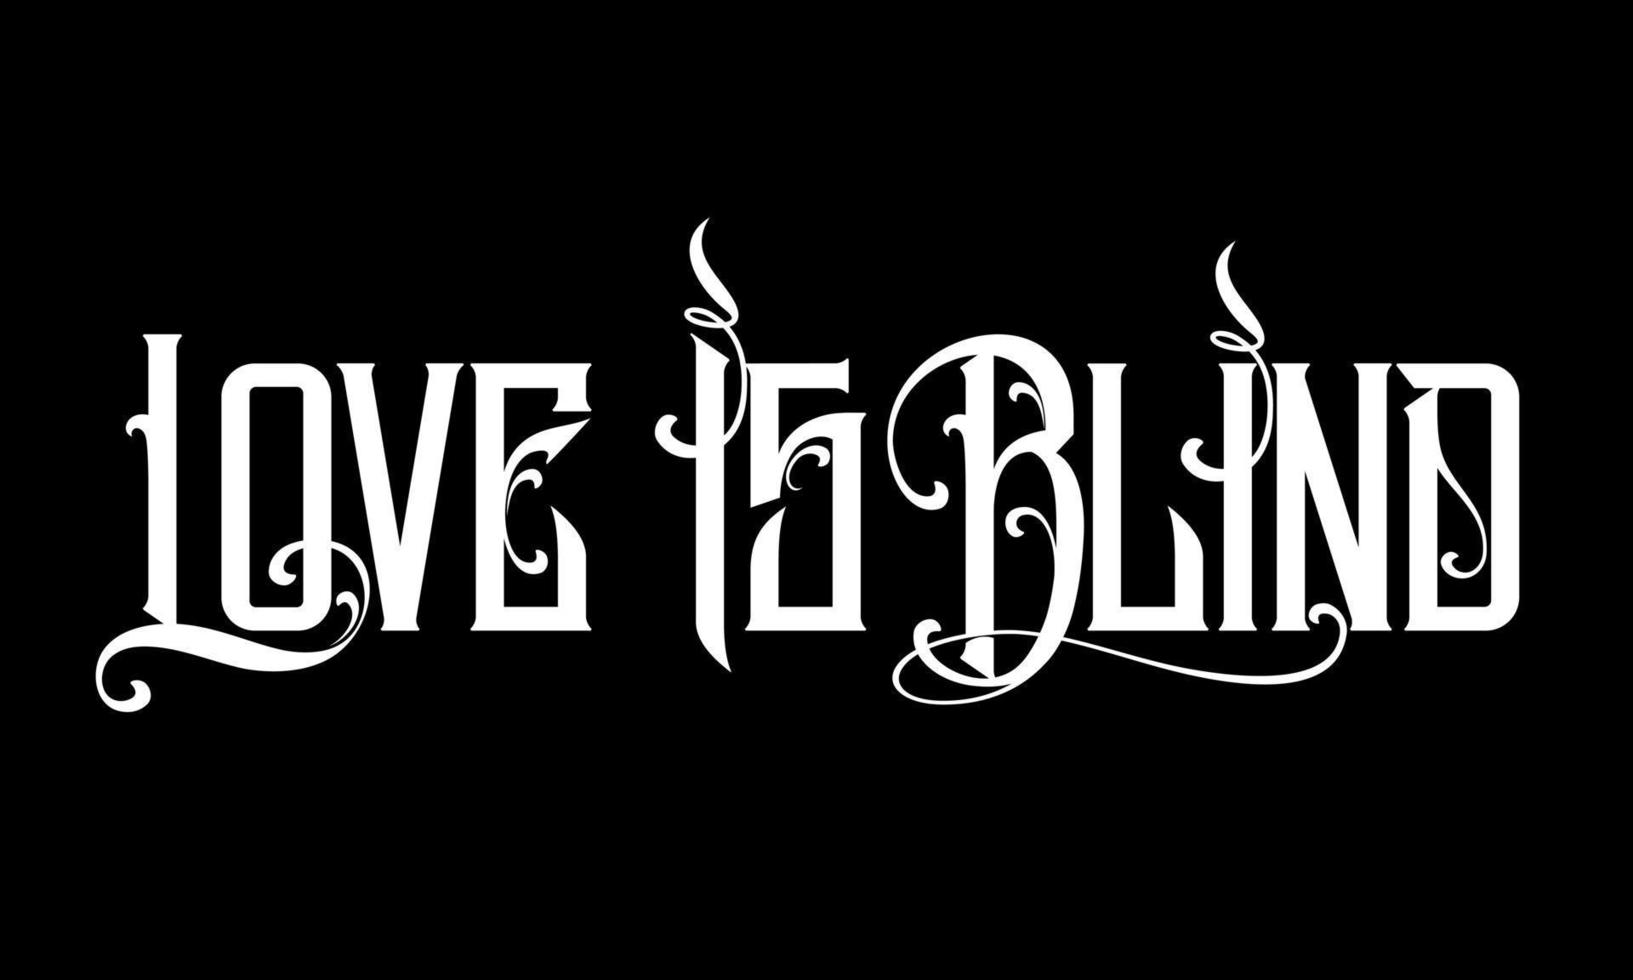 Lettering positive quote about love to valentines day. Love is blind. Tattoo style vector